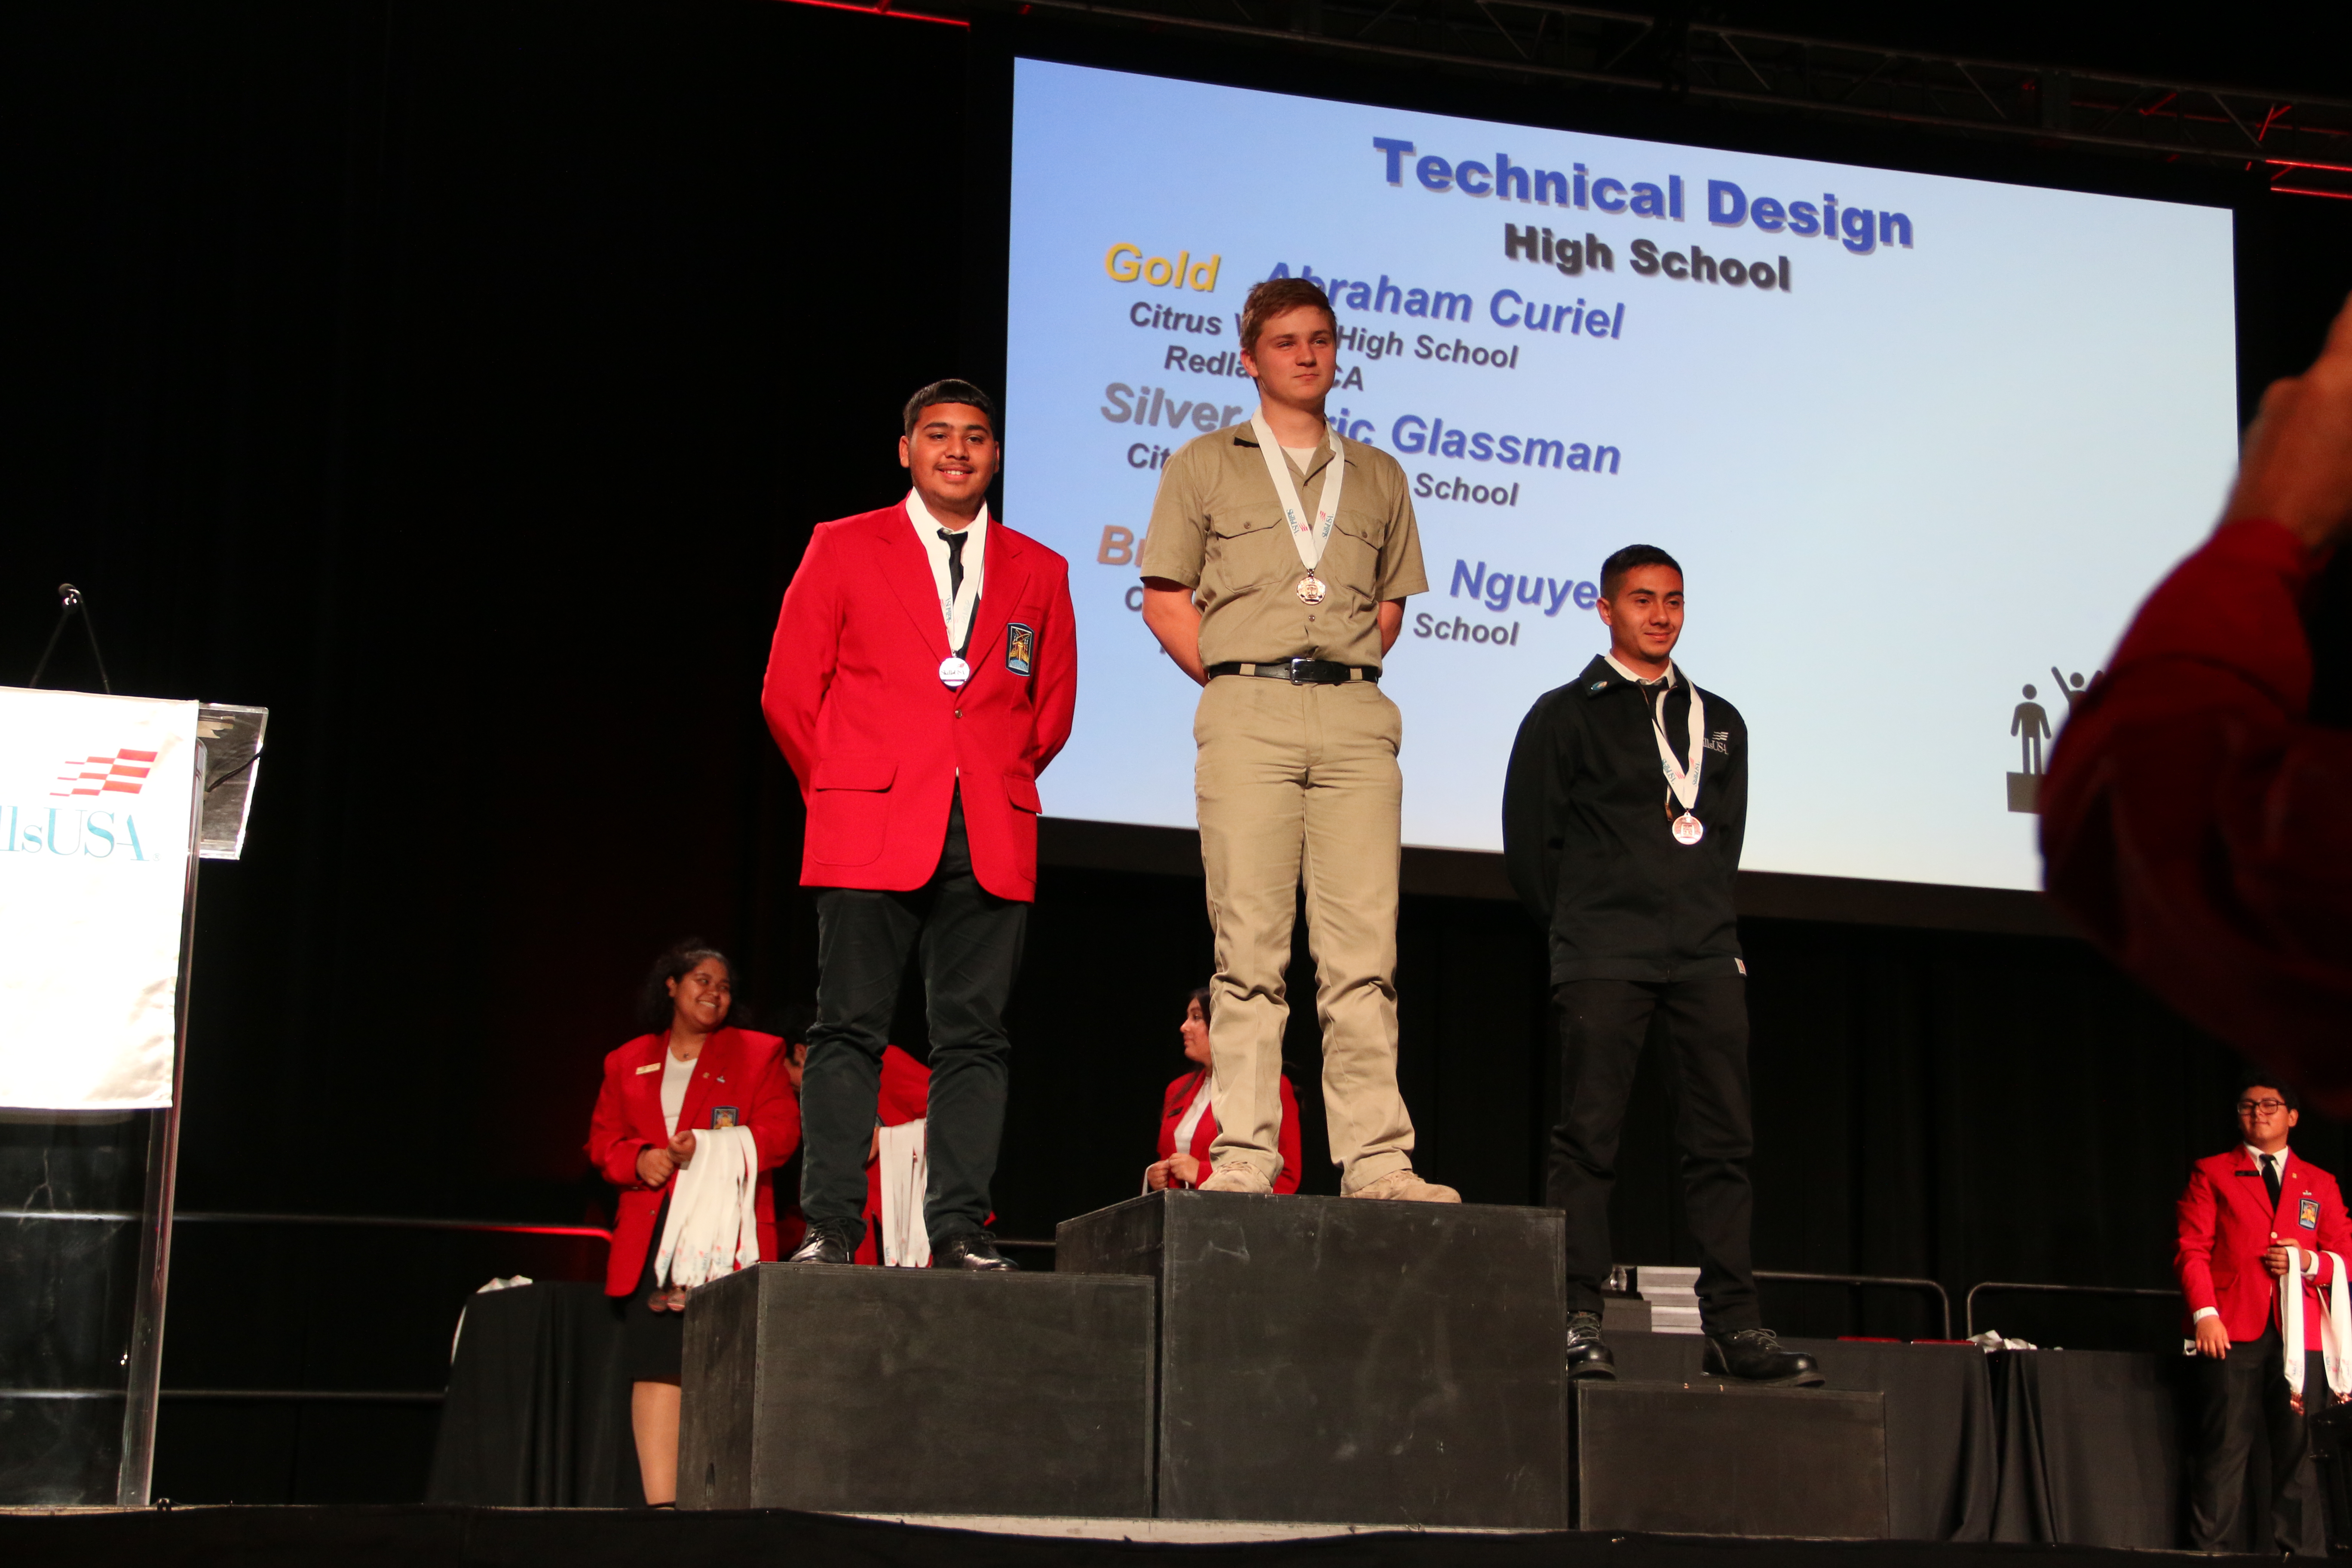 Thumbnail for SPHS students win gold at SkillsUSA state competition